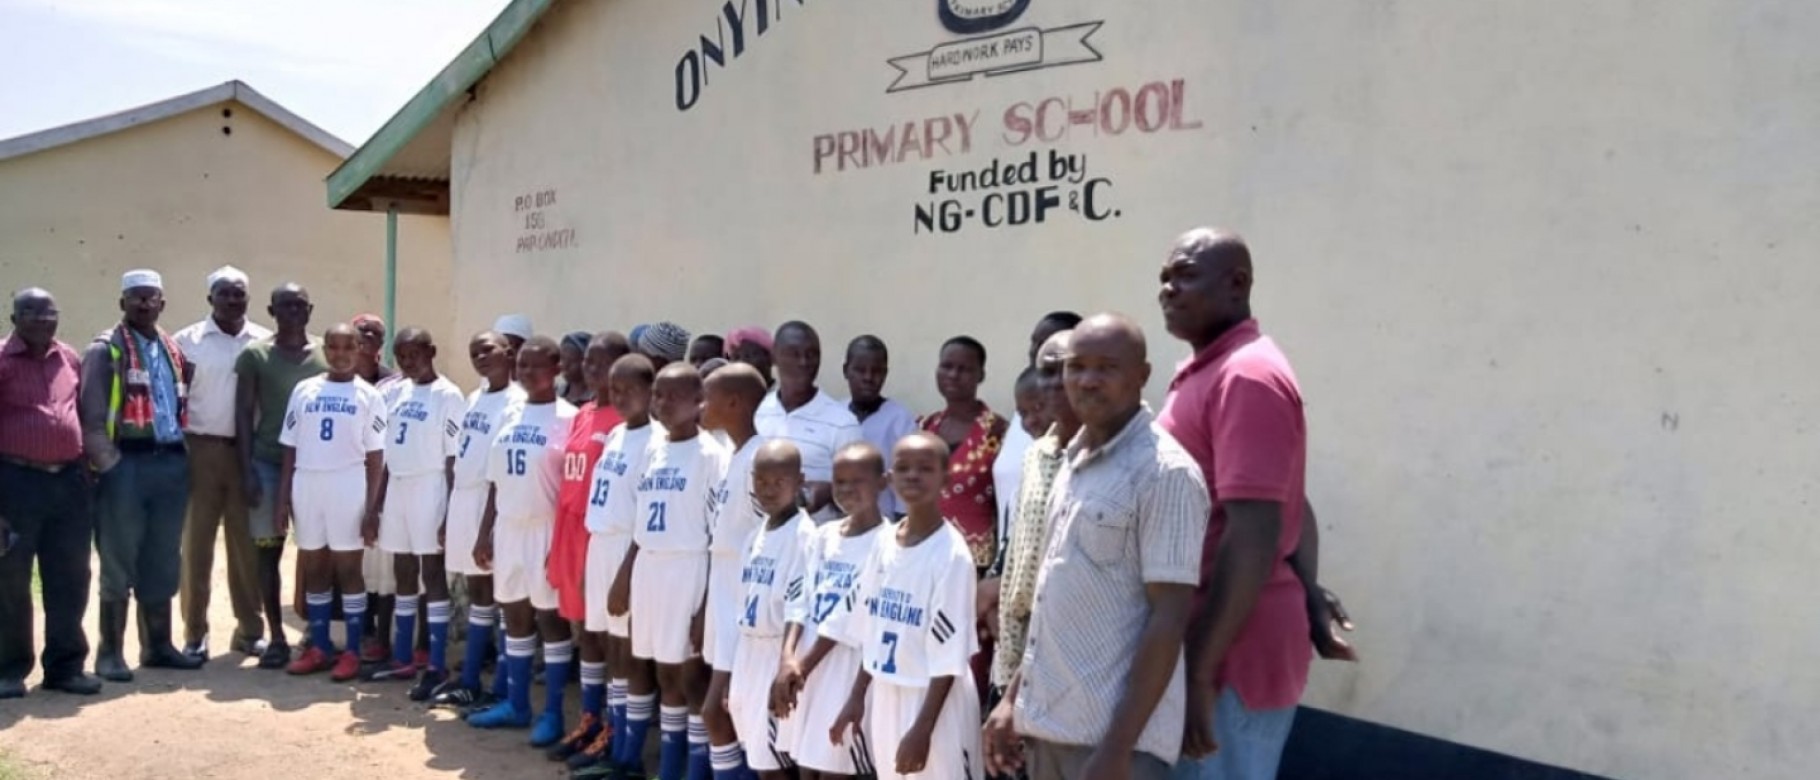 Students in Kenya wear uniforms donated by the UNE soccer program